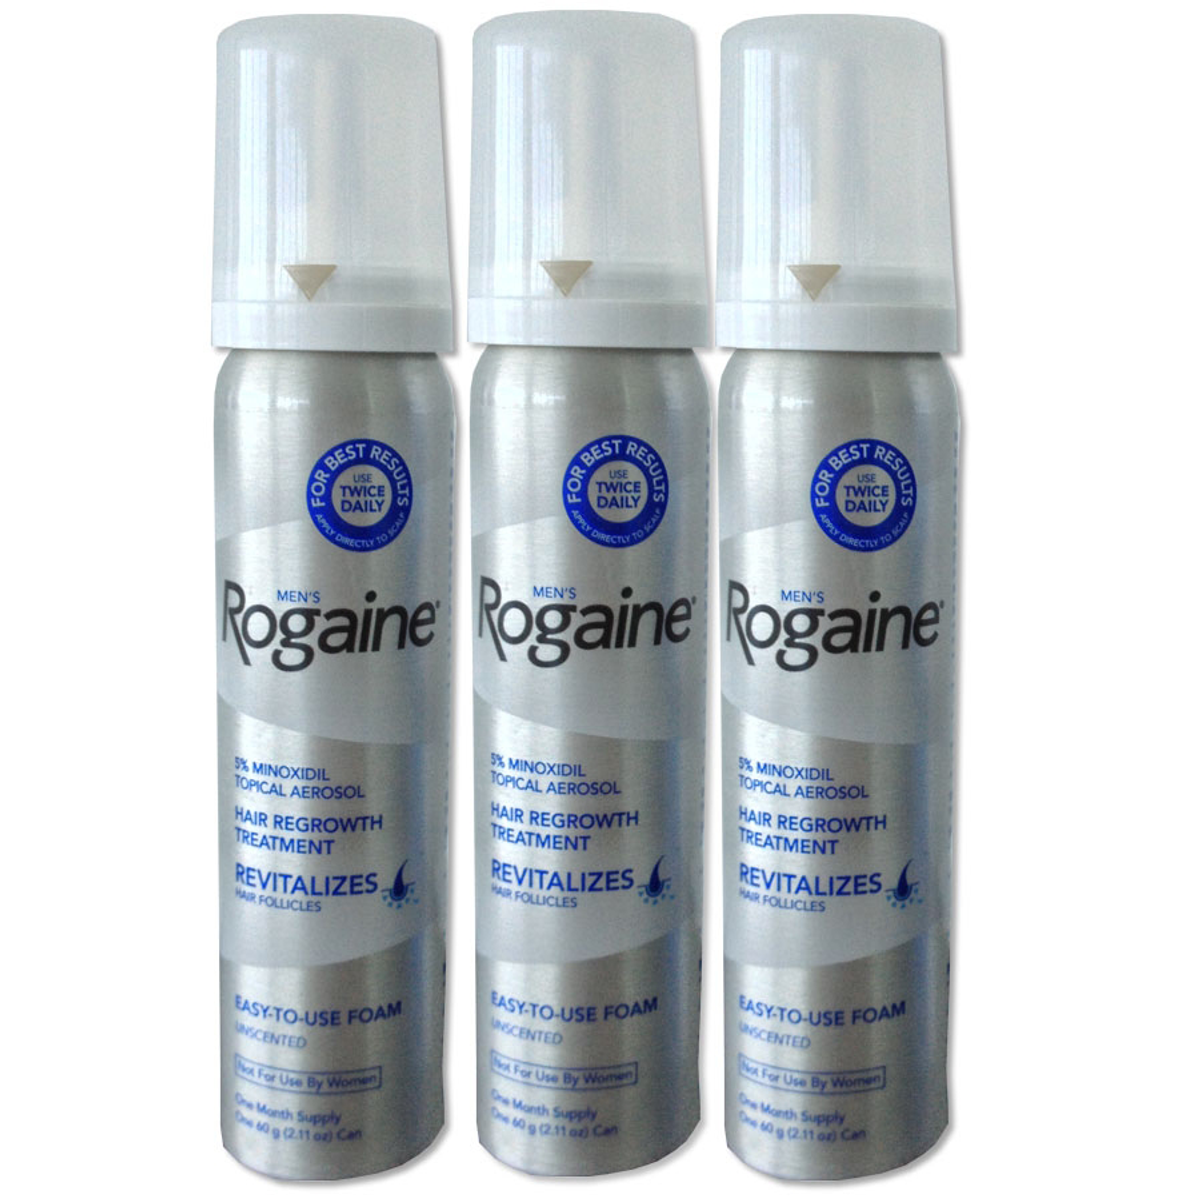 How to use rogaine in first time